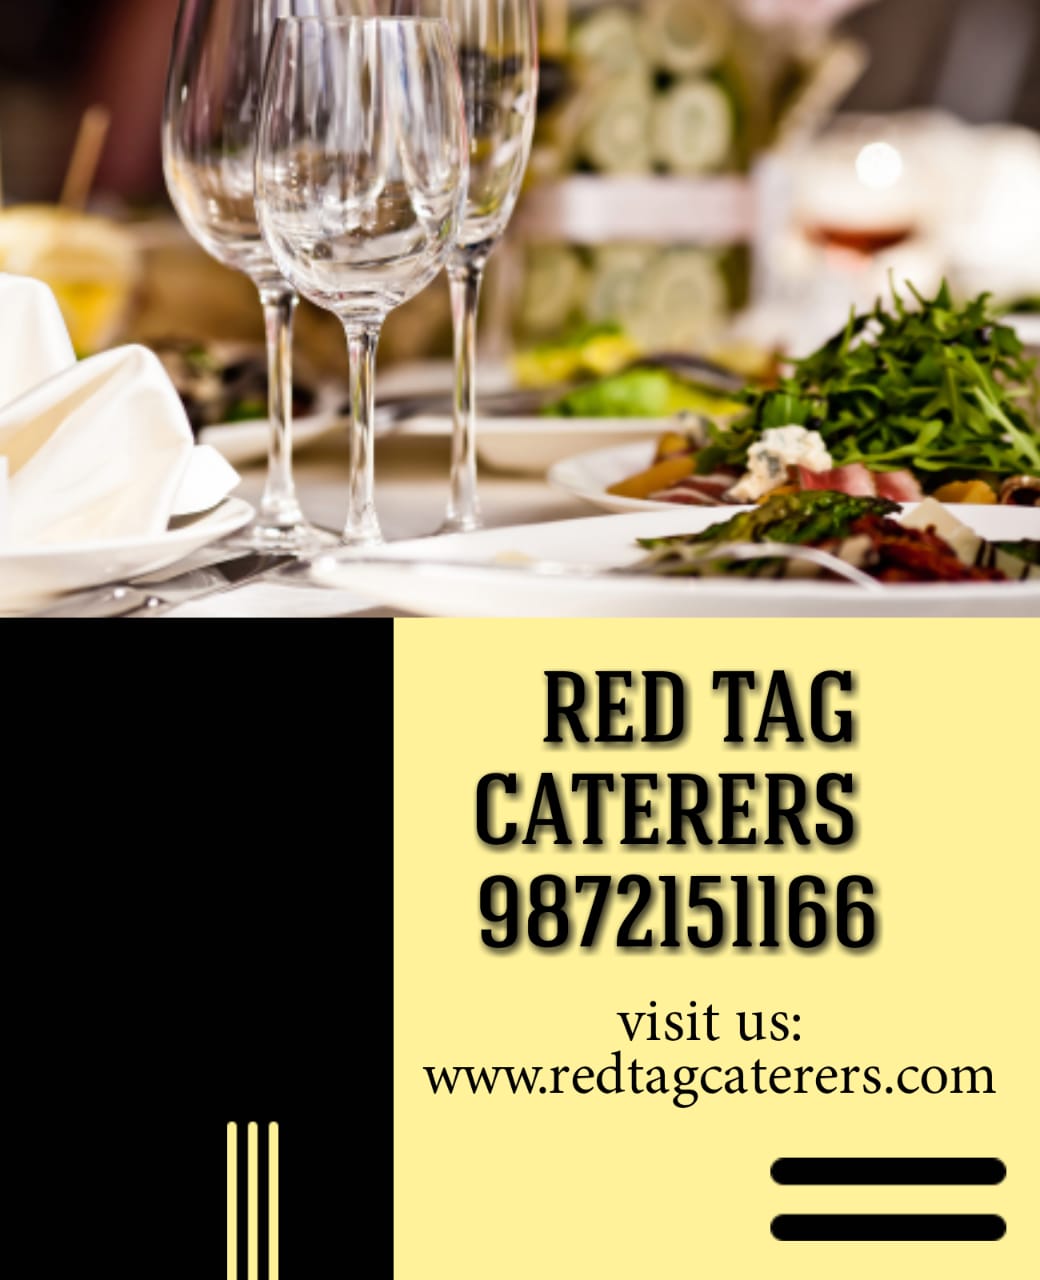  RED TAG caterers have the capacity to cater to 4,000 people plus per day.  | Red Tag Caterers | High quality catering in Chandigarh, best budget catering in Chandigarh, vegetarian catering in Chandigarh, best and fresh food catering in Chandigarh, top and hygiene catering in Chandigarh,  - GL46302